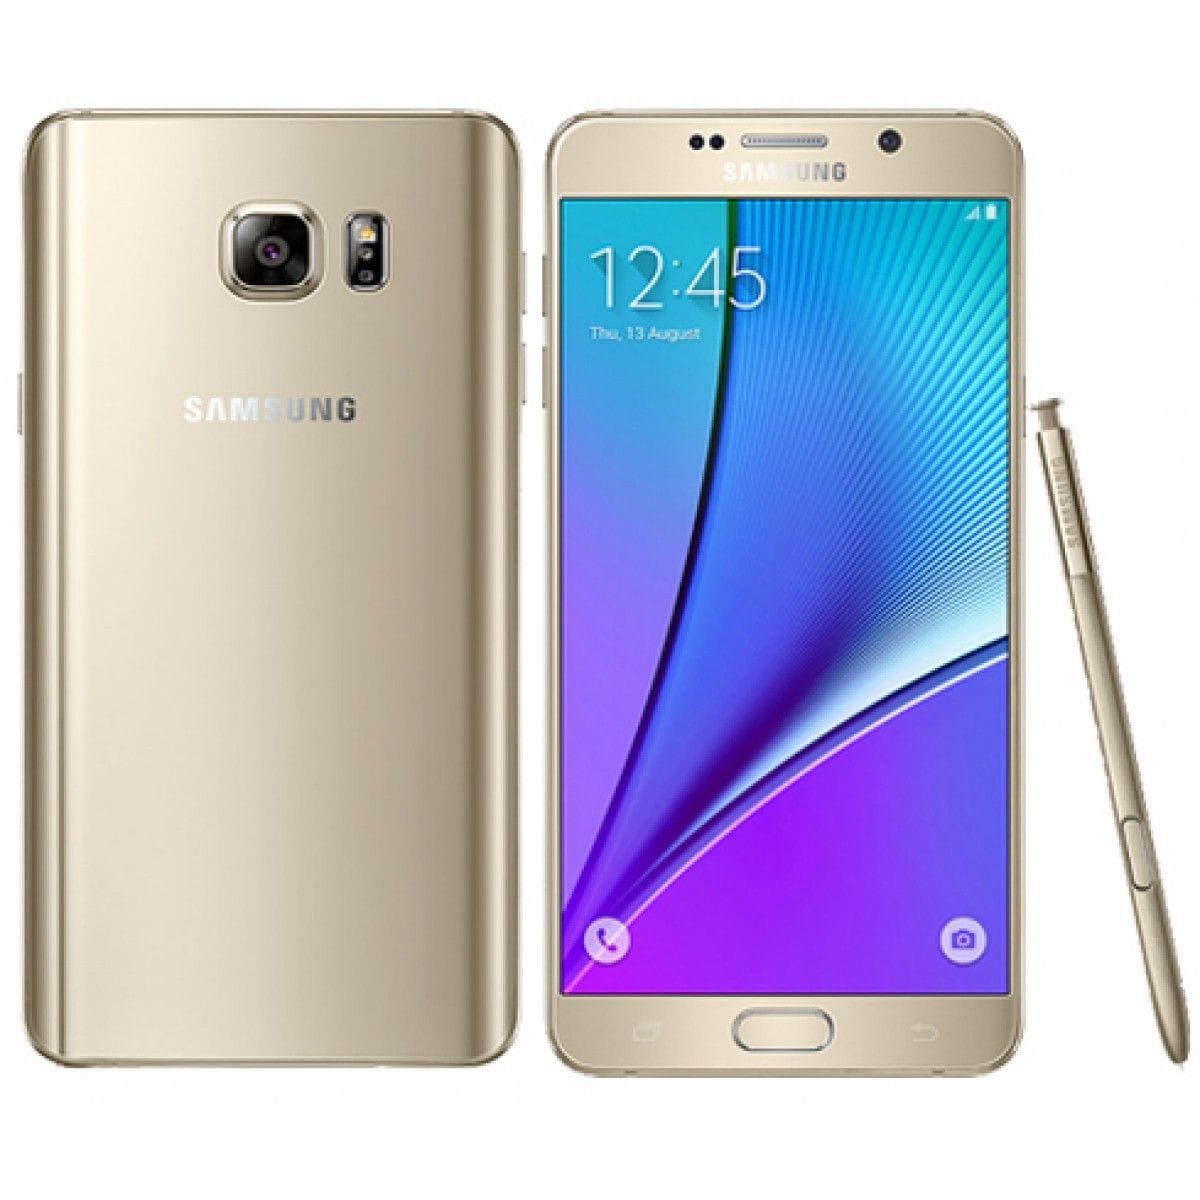 Samsung Galaxy Note 5 N920A 64GB Unlocked SmartCell-Phone for GSM Car